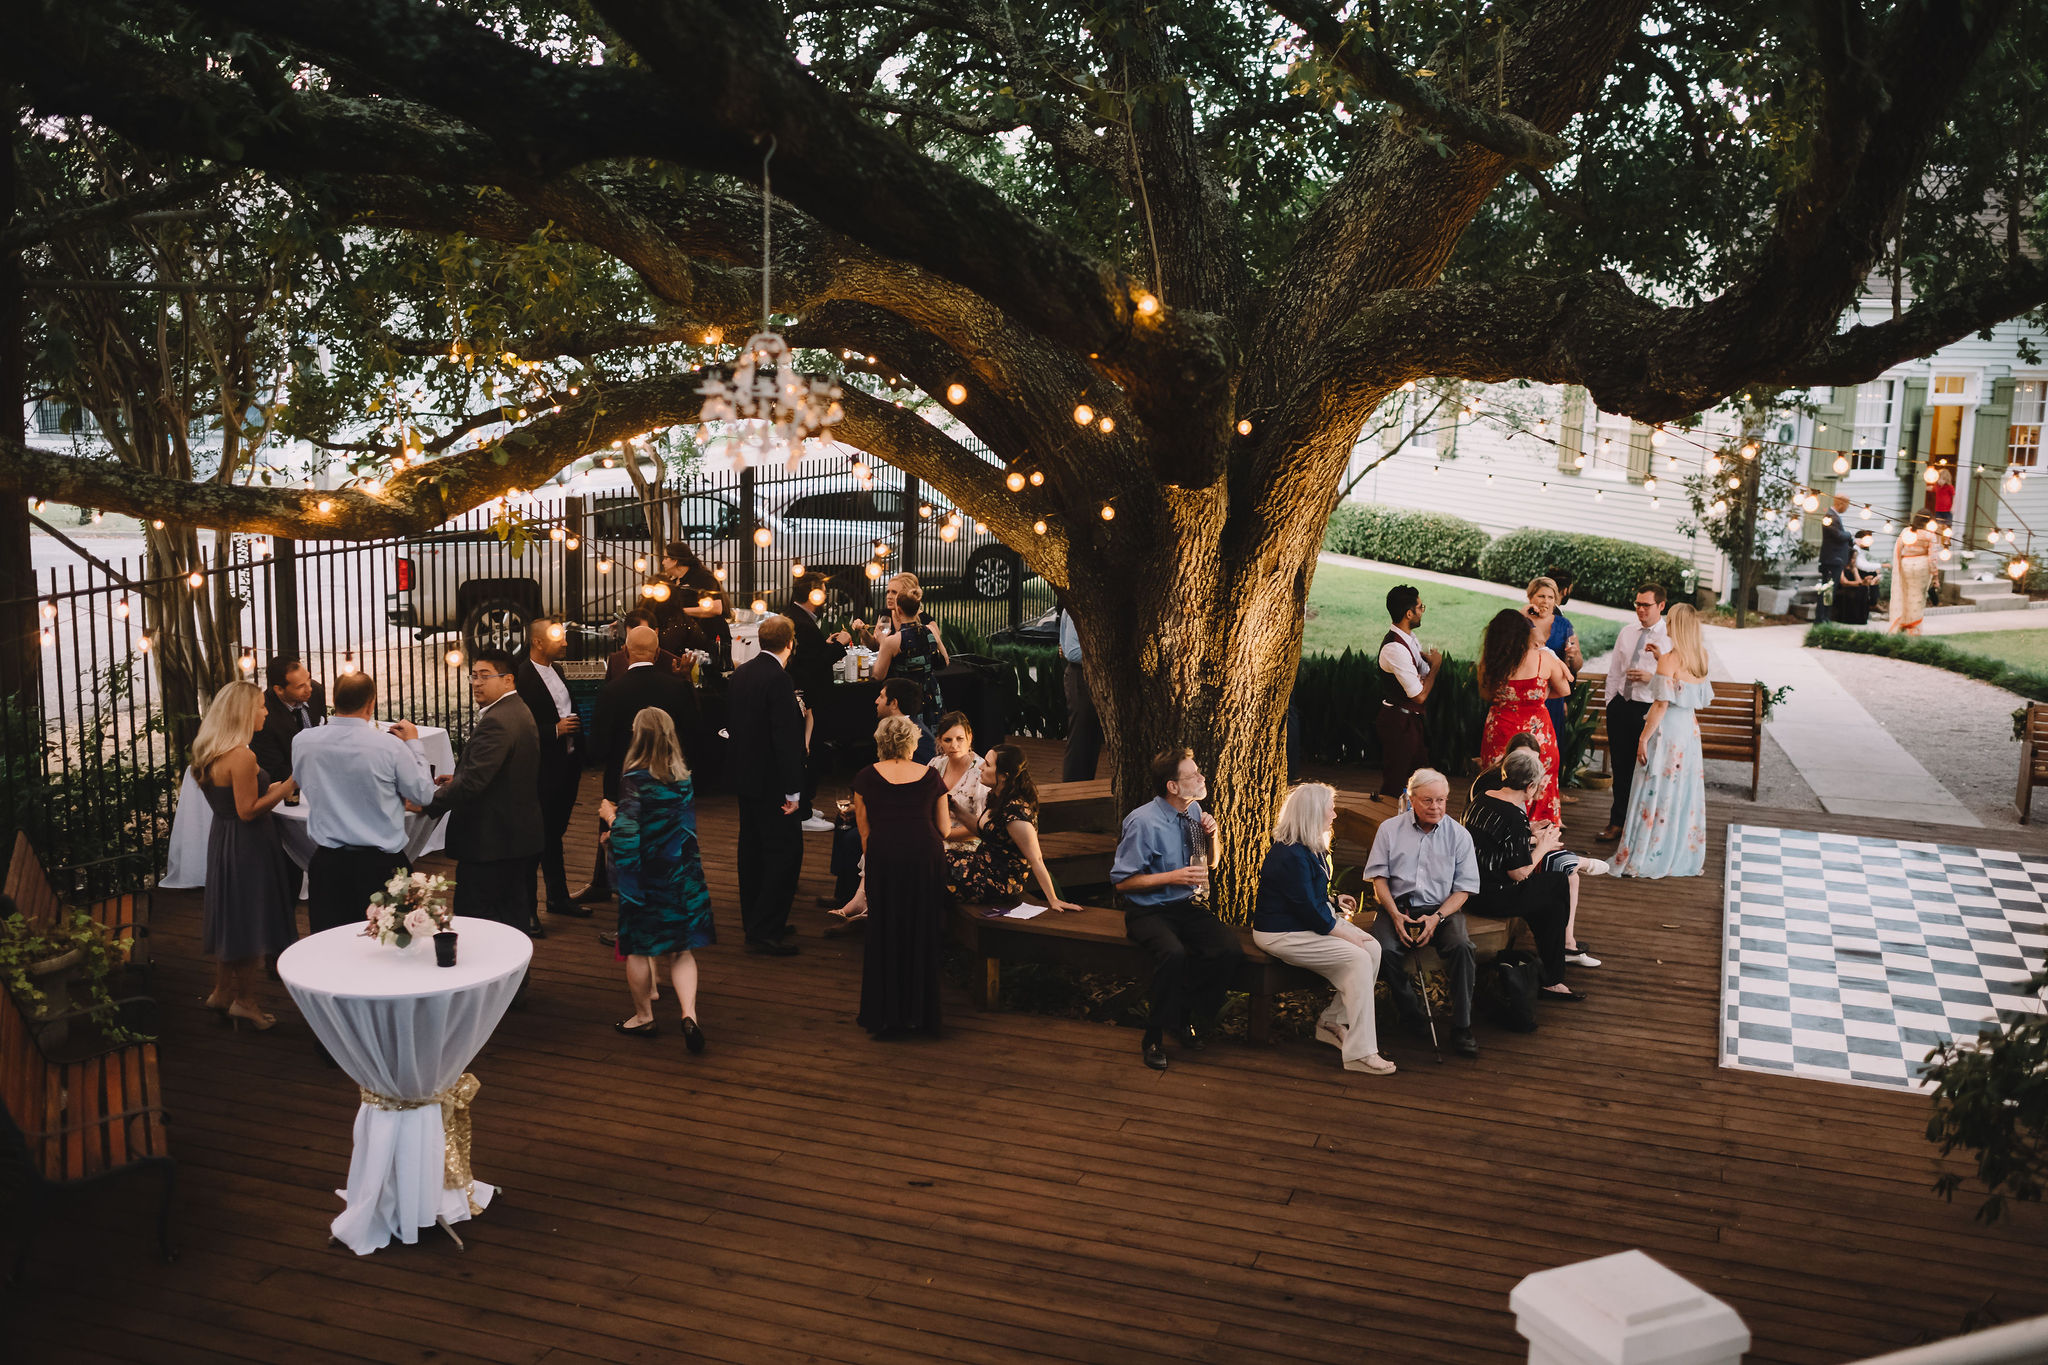 Guests enjoyed a cocktail hour under illuminated oak trees while the happy couple signed their marriage license and enjoyed a private meal together.